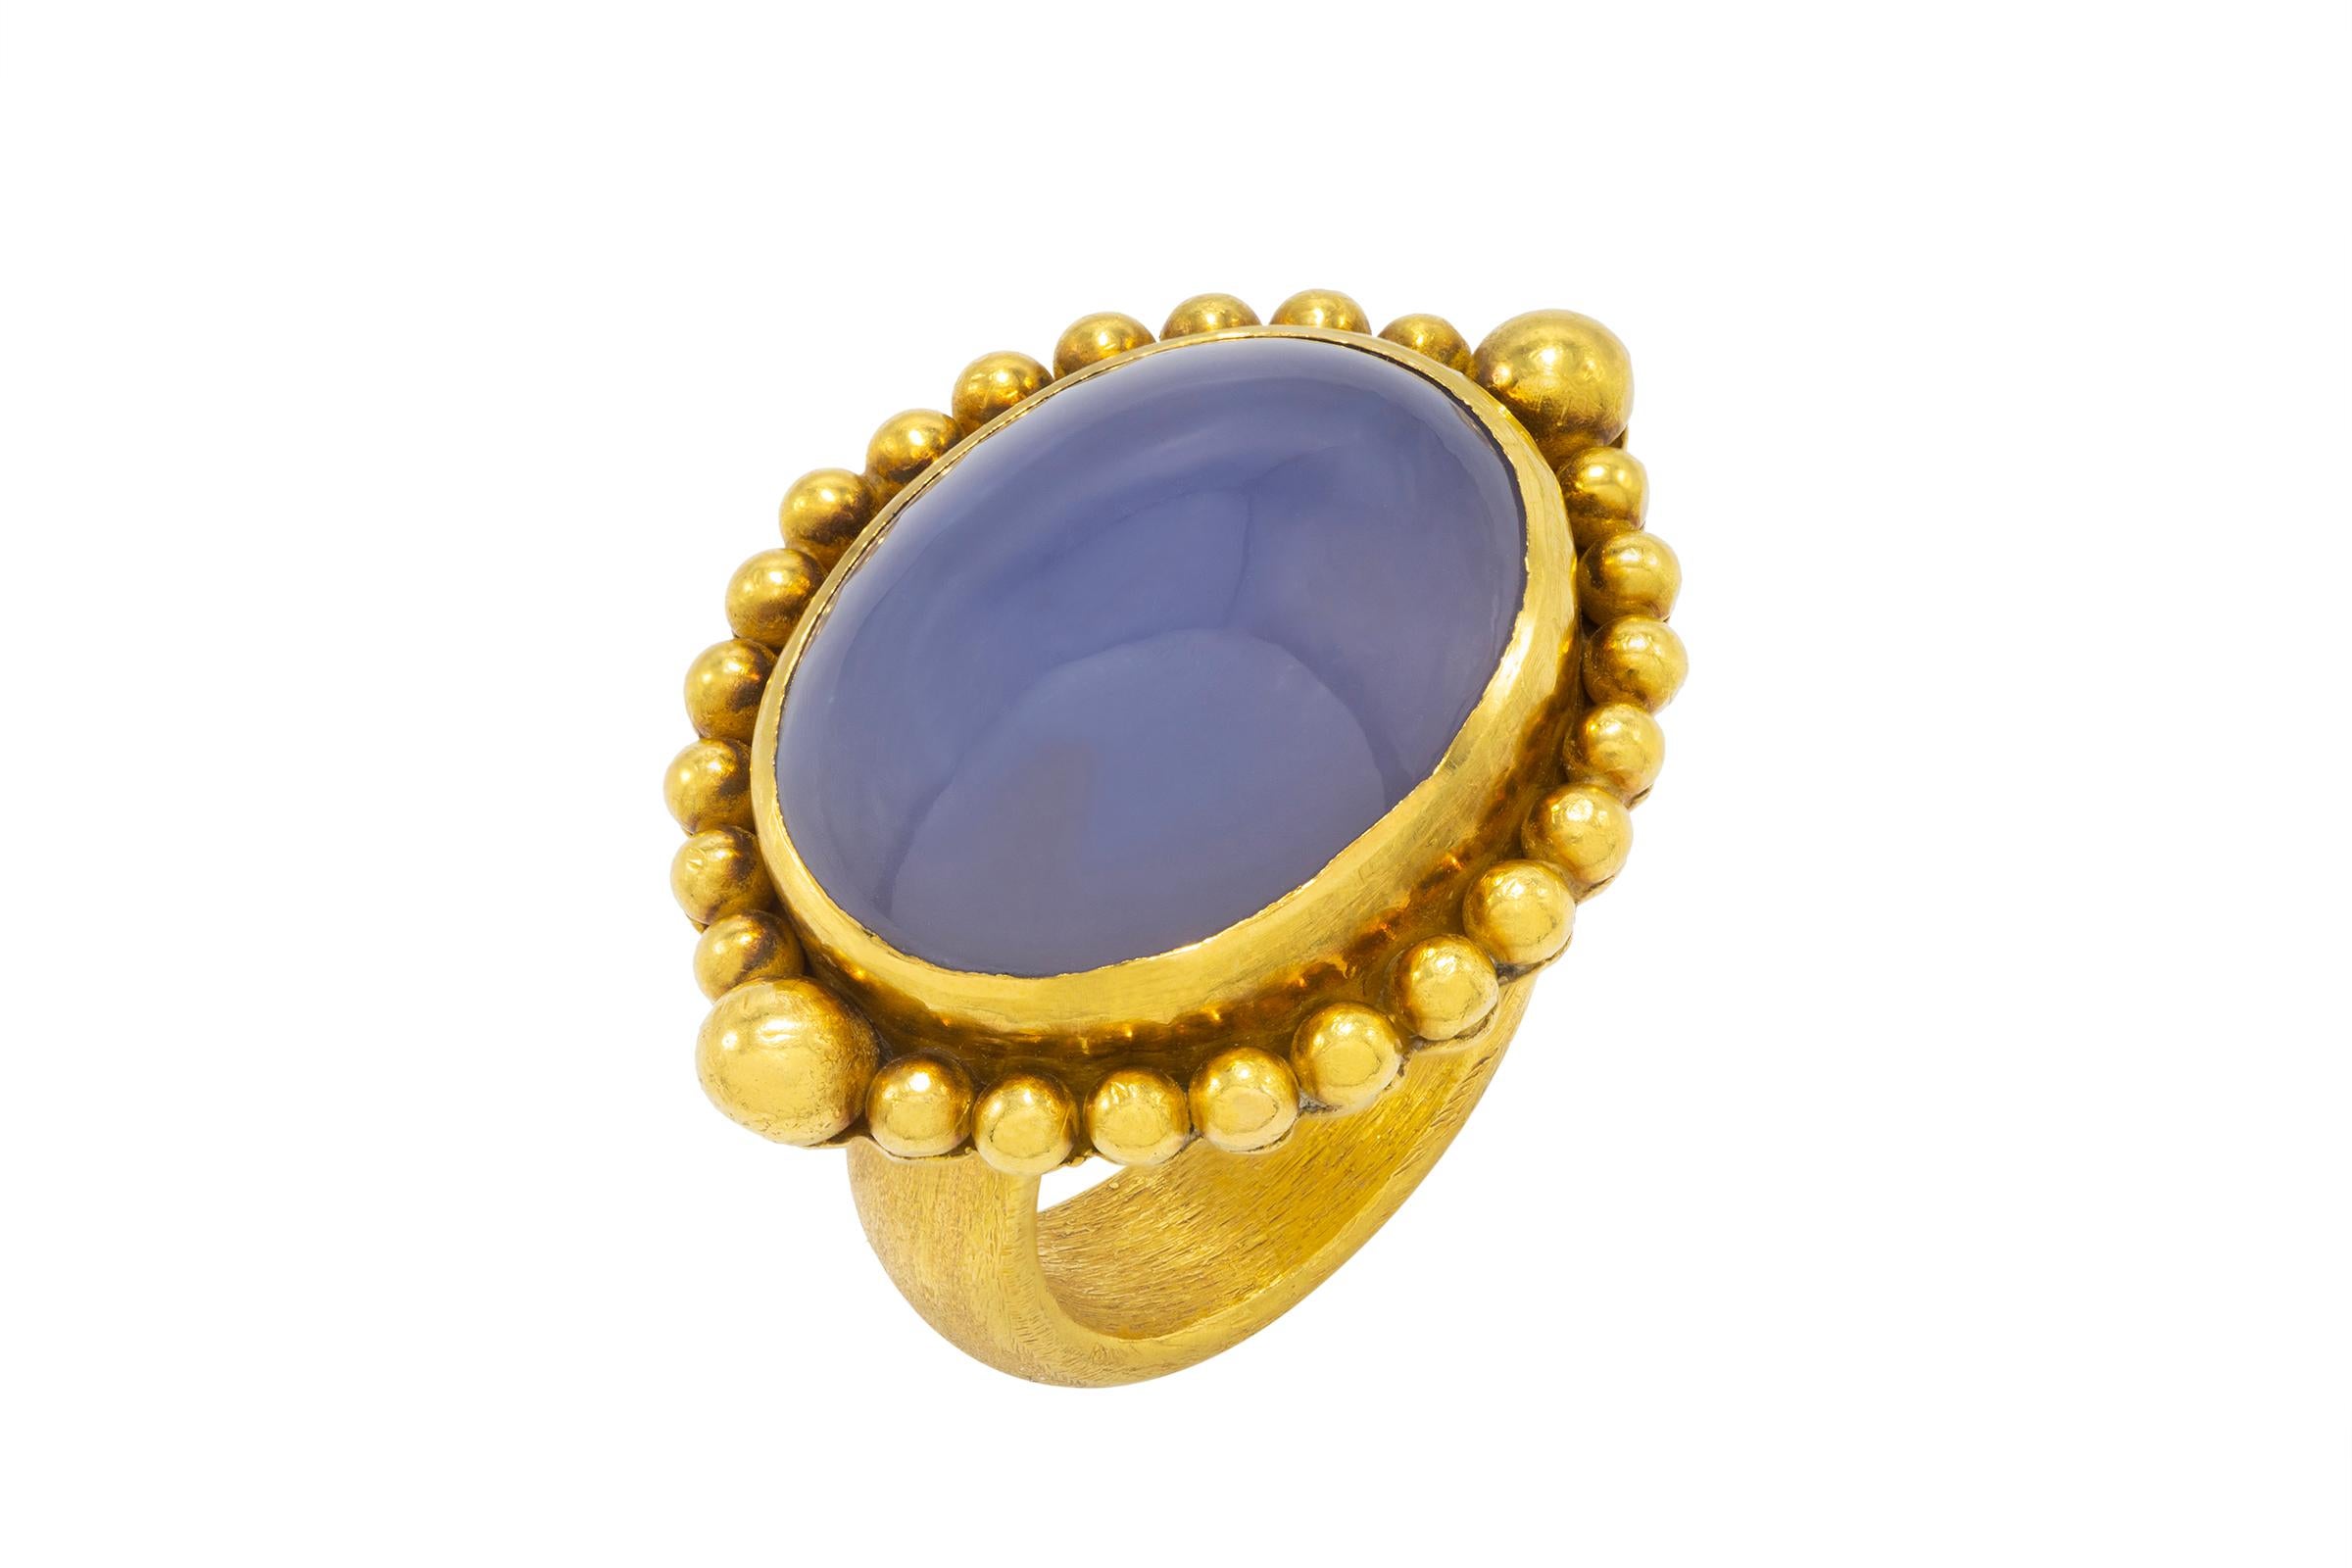 Artisan Chalcedony Cocktail Ring in 22k Gold by Tagili